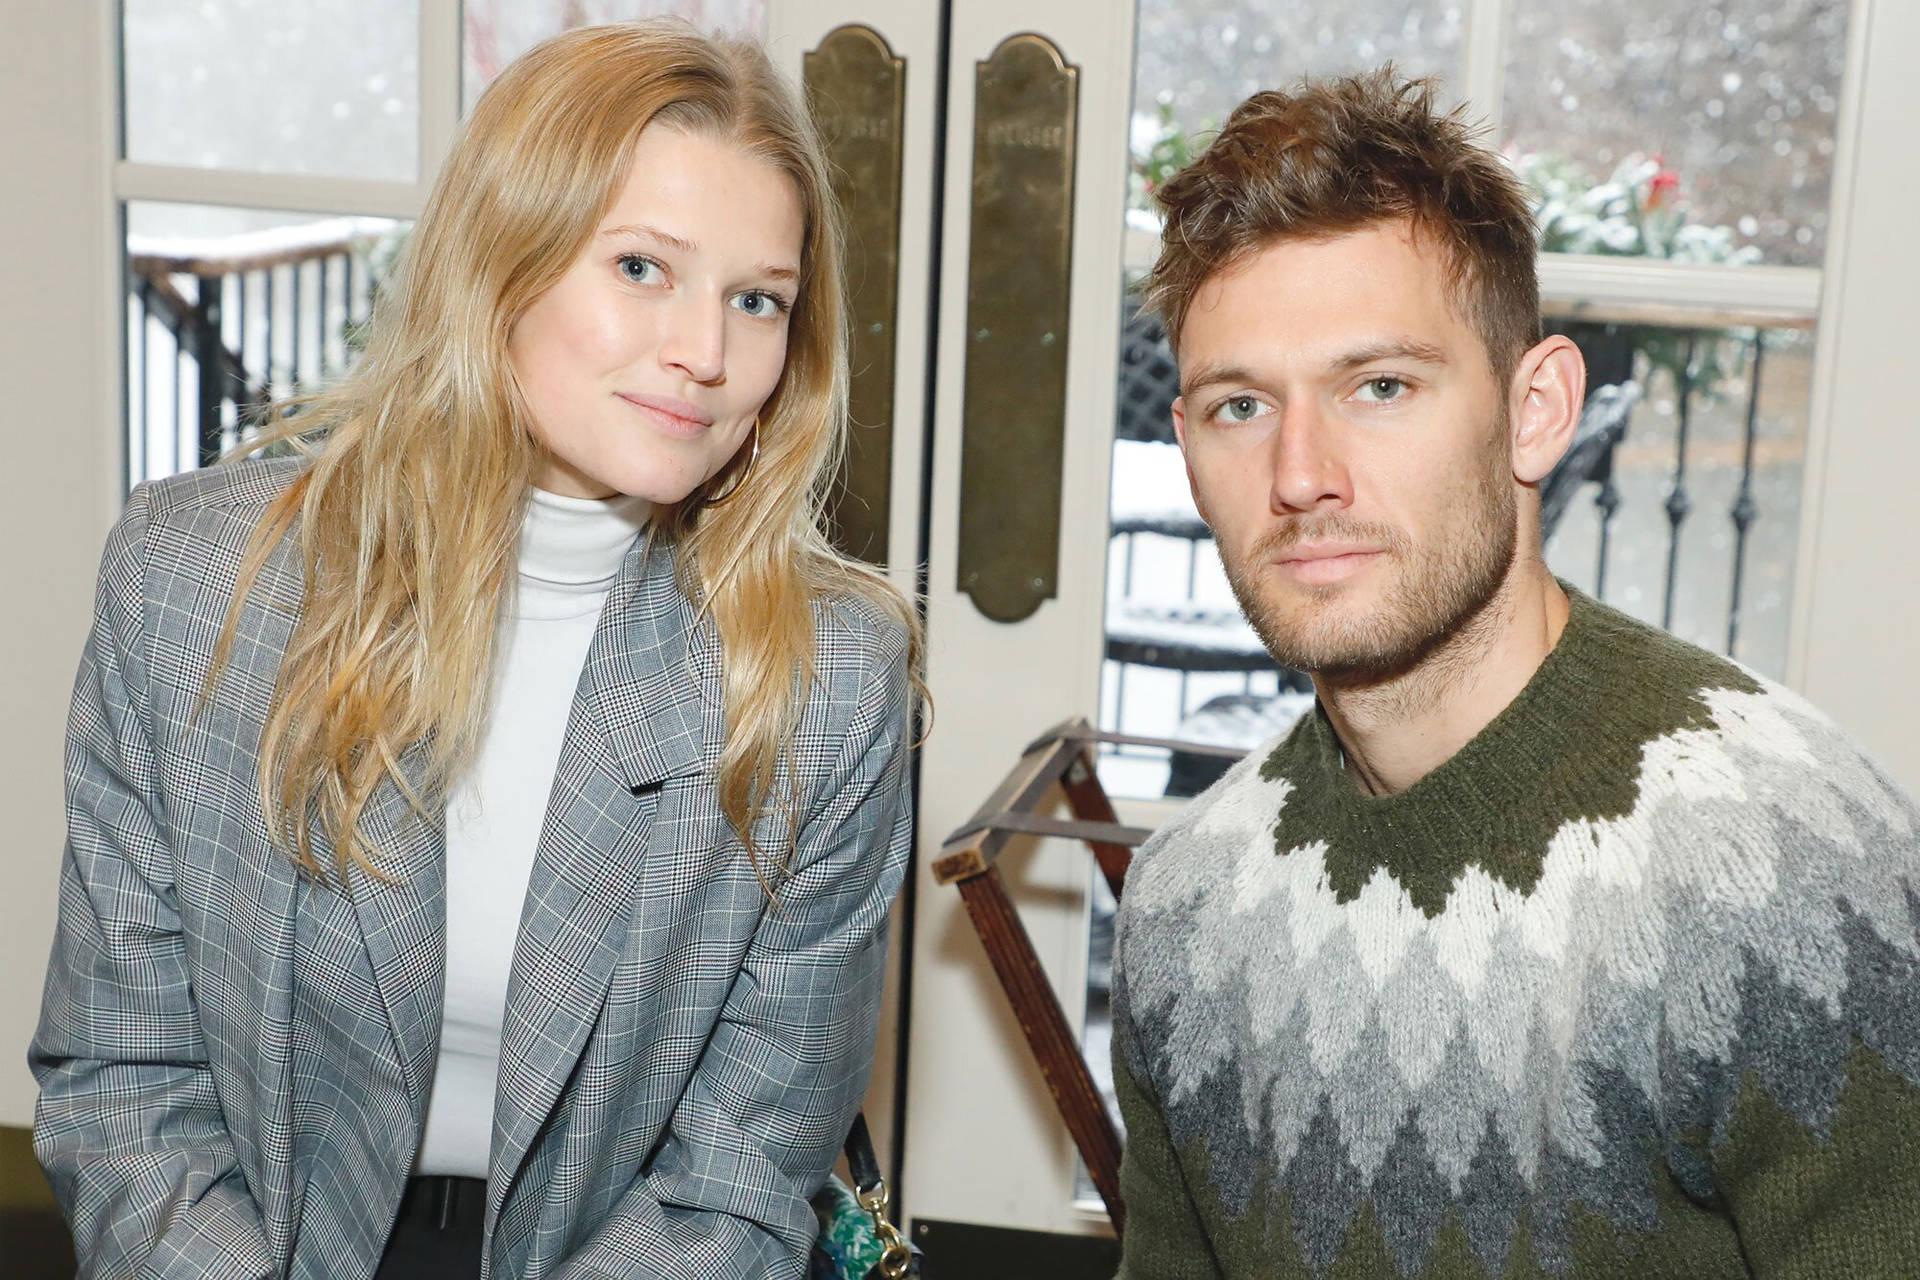 Toni Garrn and Alex Pettyfer posing together during an event Wallpaper